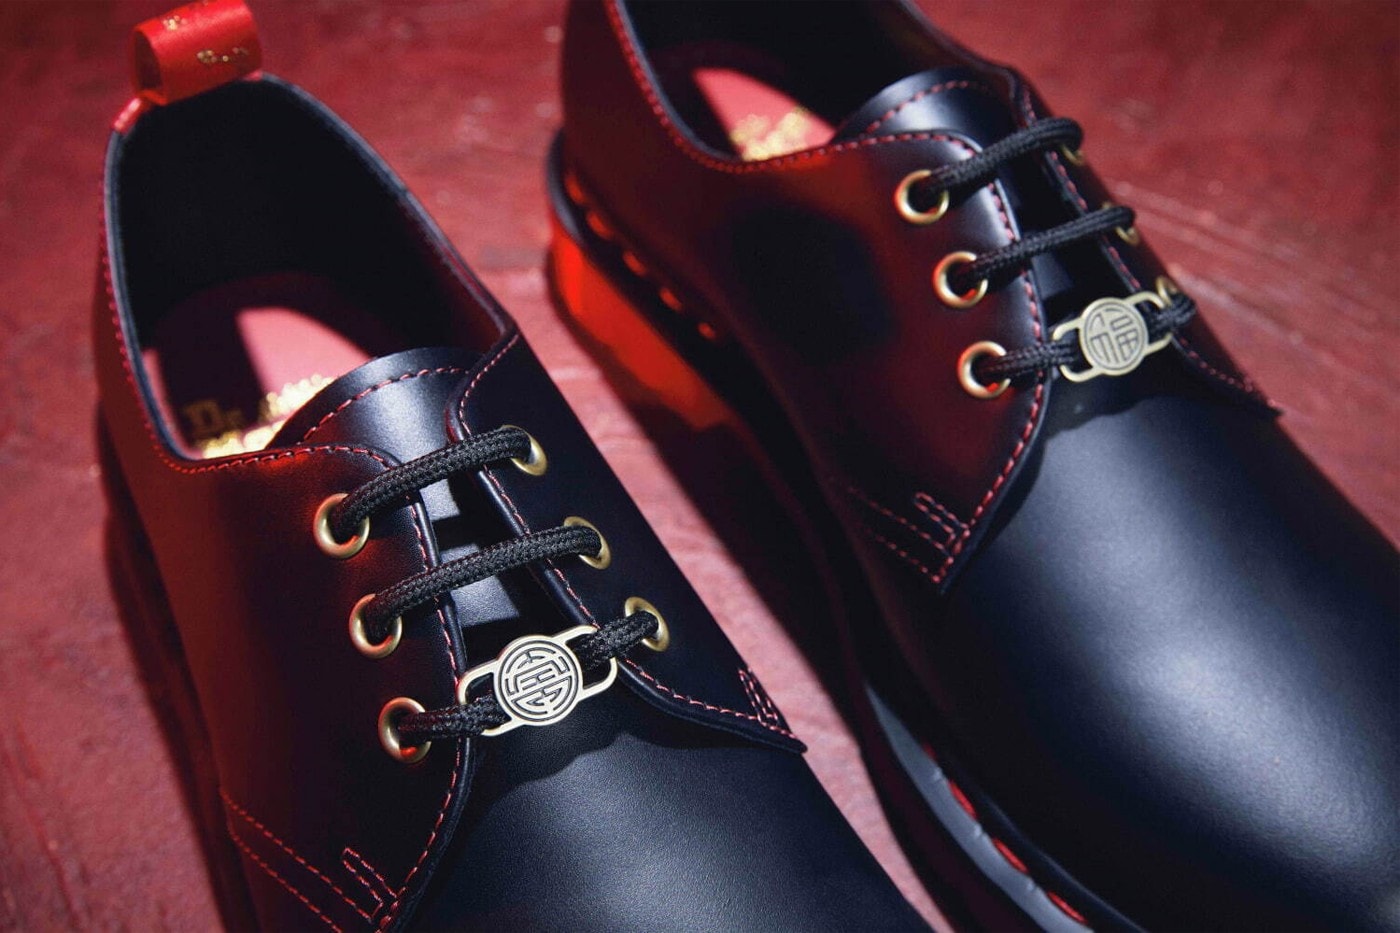 dr martens year of the rabbit 1460 1461 boots release info where to buy